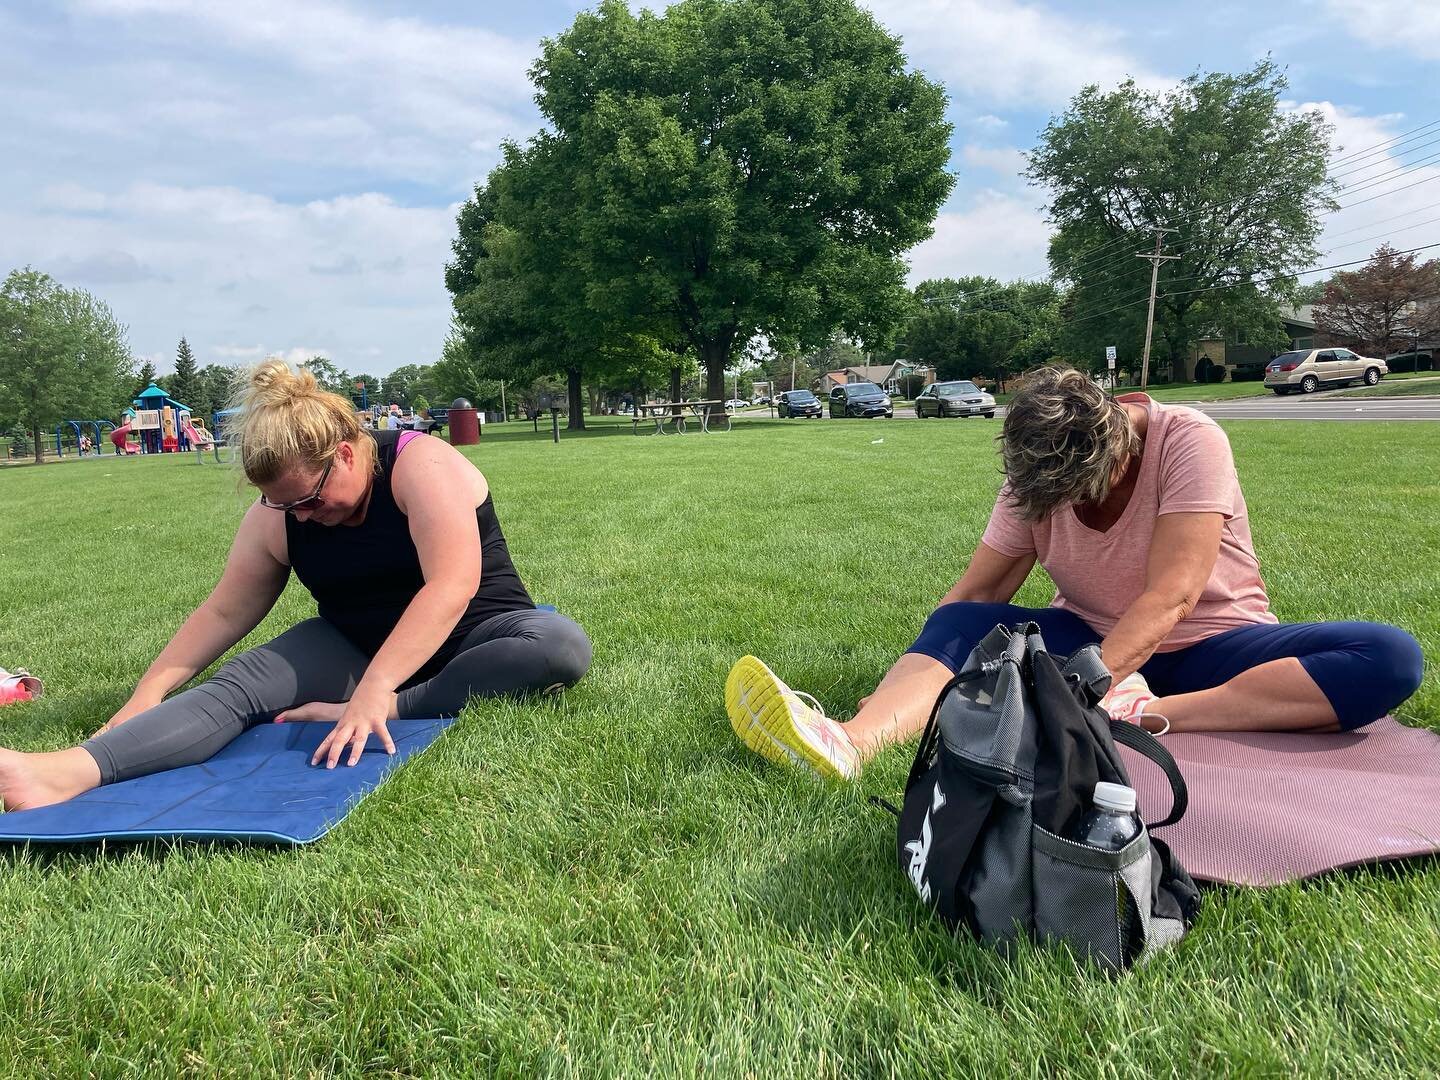 Come enjoy the fresh air, lakeside, for Yoga @4pm or HIIT @5:30pm

Cycle45 is Virtual today at 2pm and Fusion is Virtual at 7pm

Register using link in profile.

#yoga #stretch #starrfitness #outdoorfitness #smallgroupfitness #virtualfitness #hiit #b